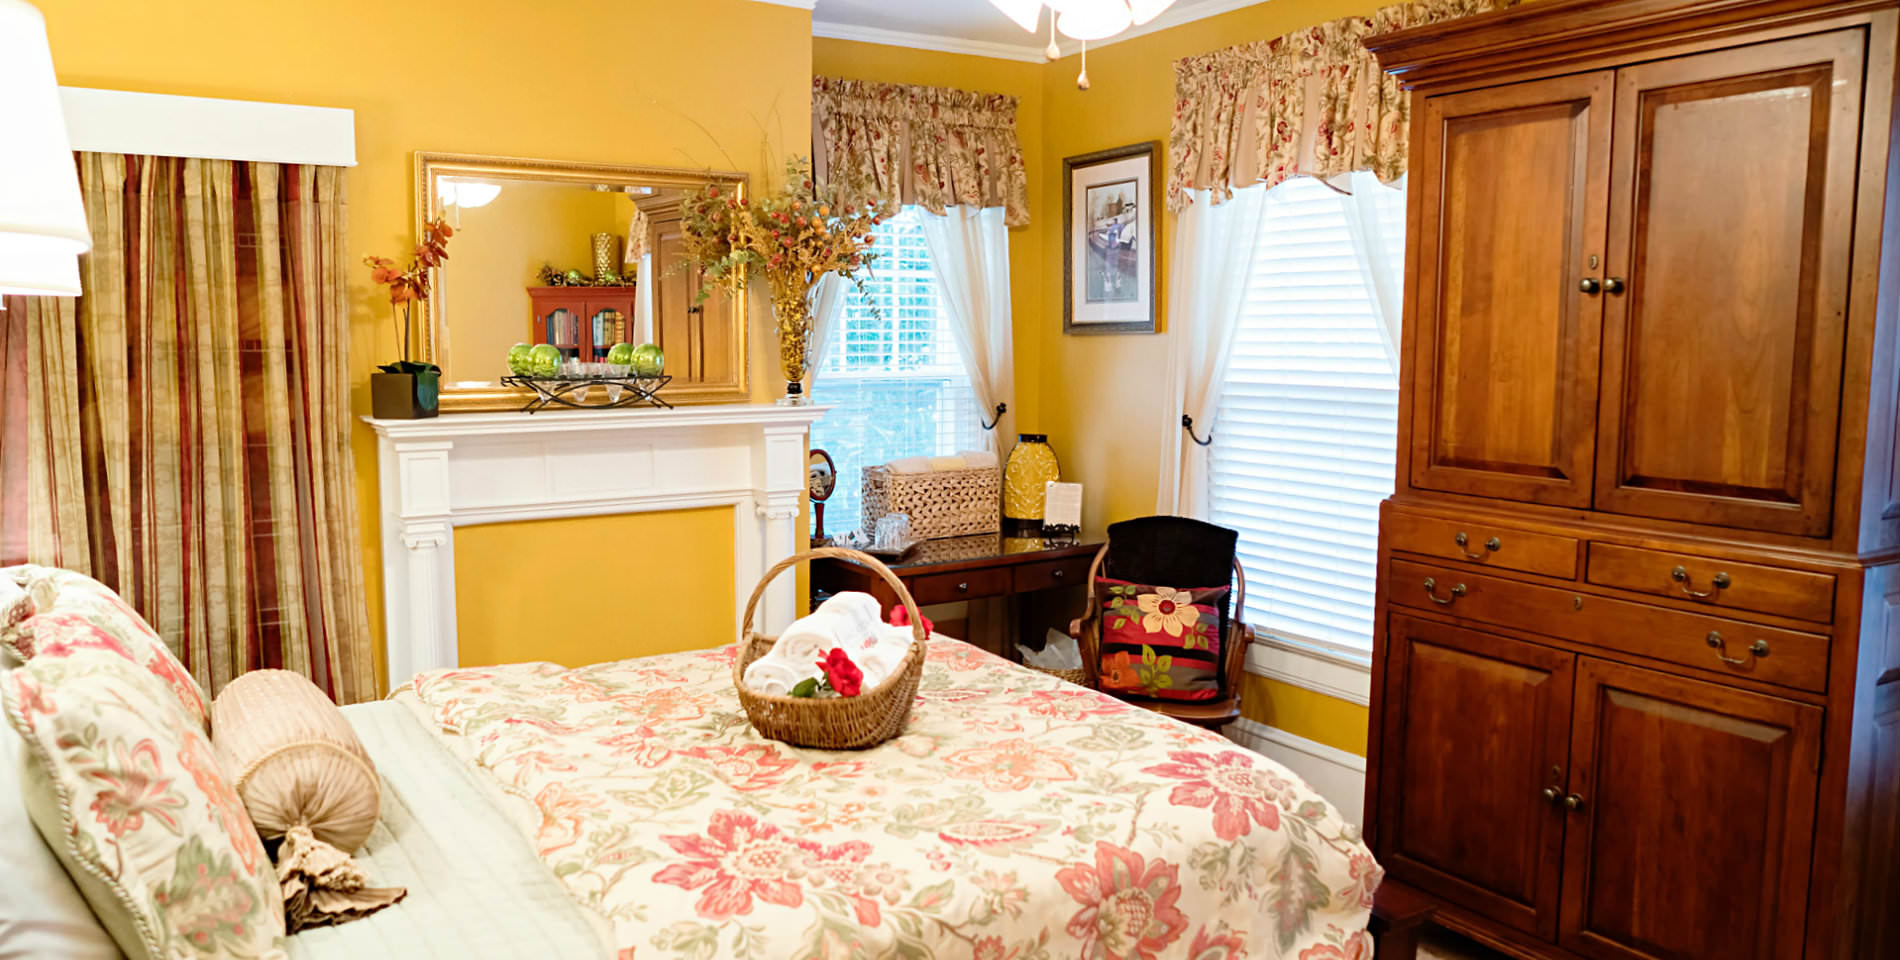 A wood armoire at the foot of a large bed with beige and floral print comforter and throw pillows.